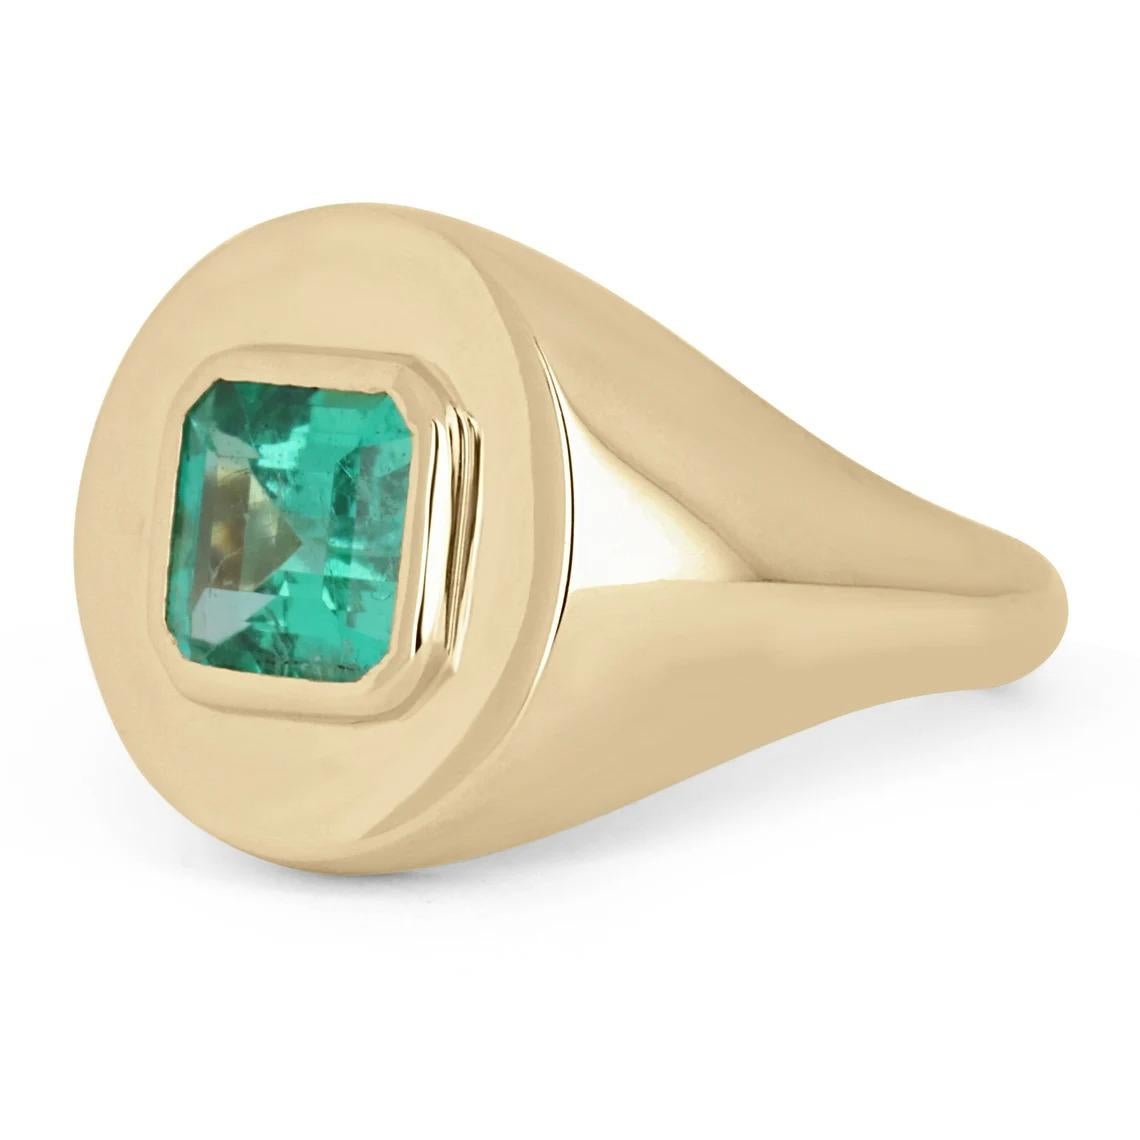 Displayed is a bluish-green Colombian emerald signet ring in 18K yellow gold. This gorgeous solitaire ring carries a full 1.50-carat emerald in a sleek signet setting. The emerald has excellent clarity and luster that will have you dazing into its